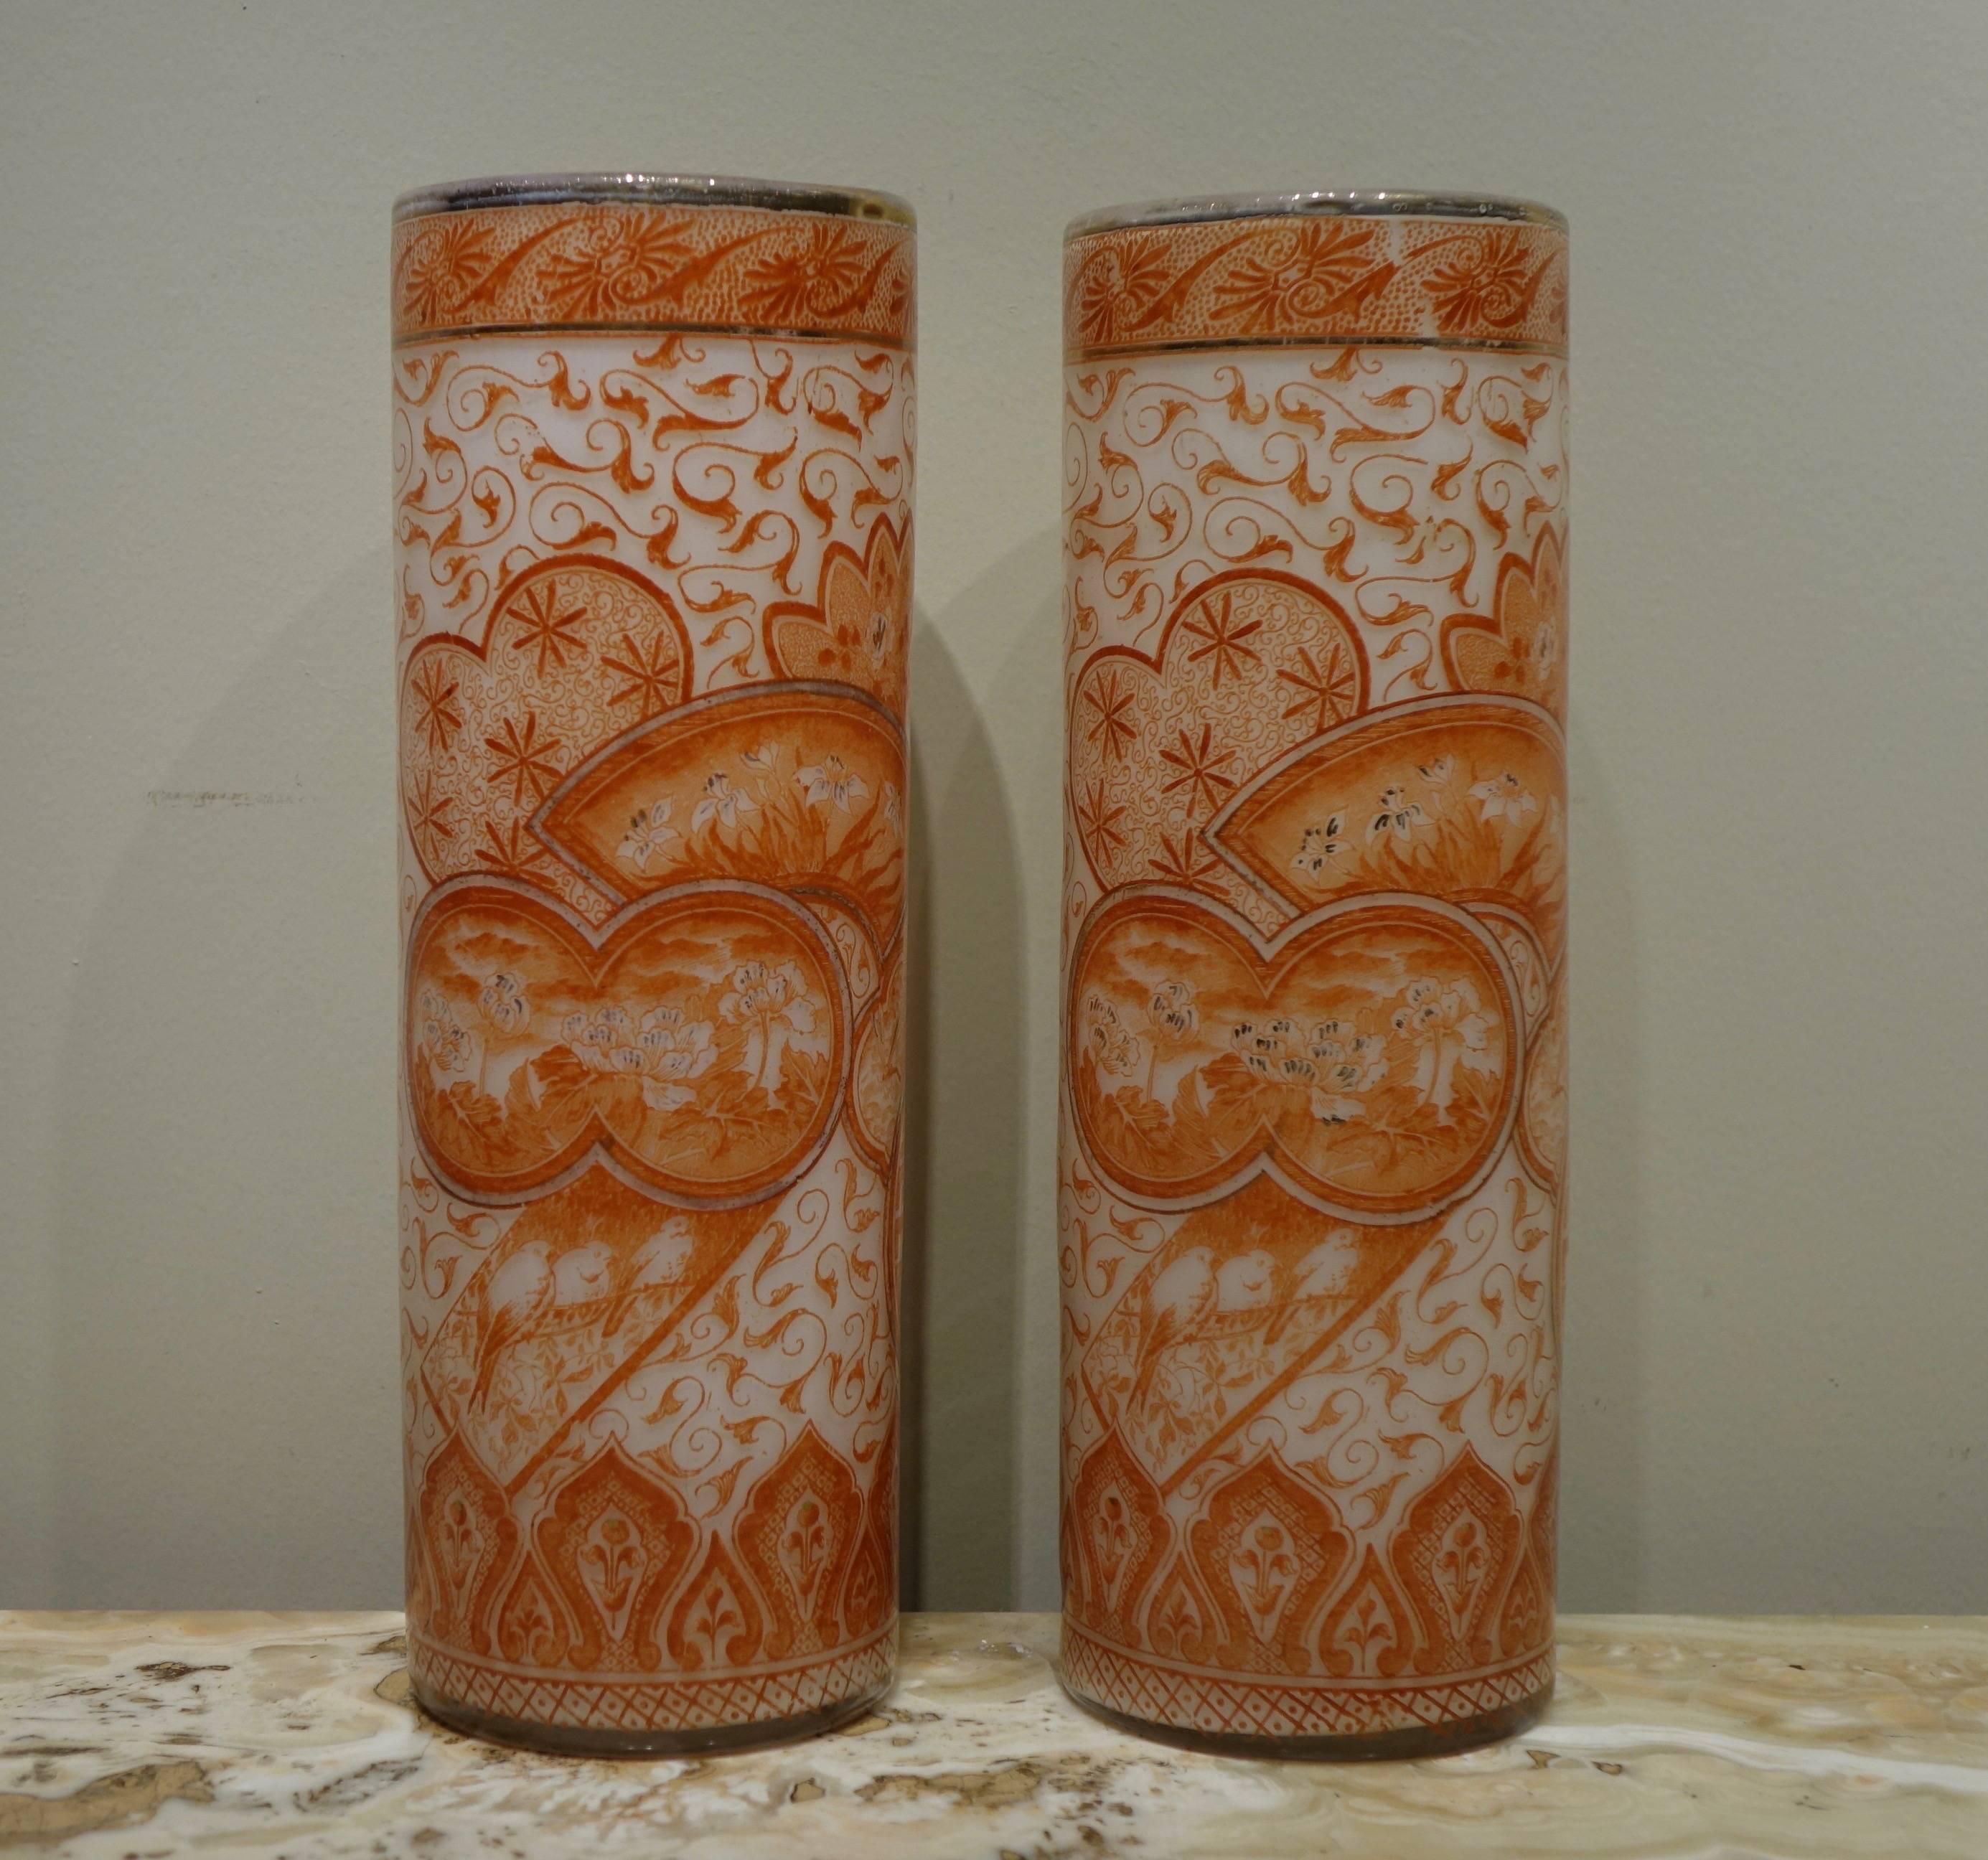 Pair of cylindrical transfer printed vases by François-Théodore Legras 
François-Théodore Legras (1839-1916) Paris French glassmaker.
He is one of the four master glassmakers at the founding of Art Nouveau with Gallé, Daum and Lalique. Very large